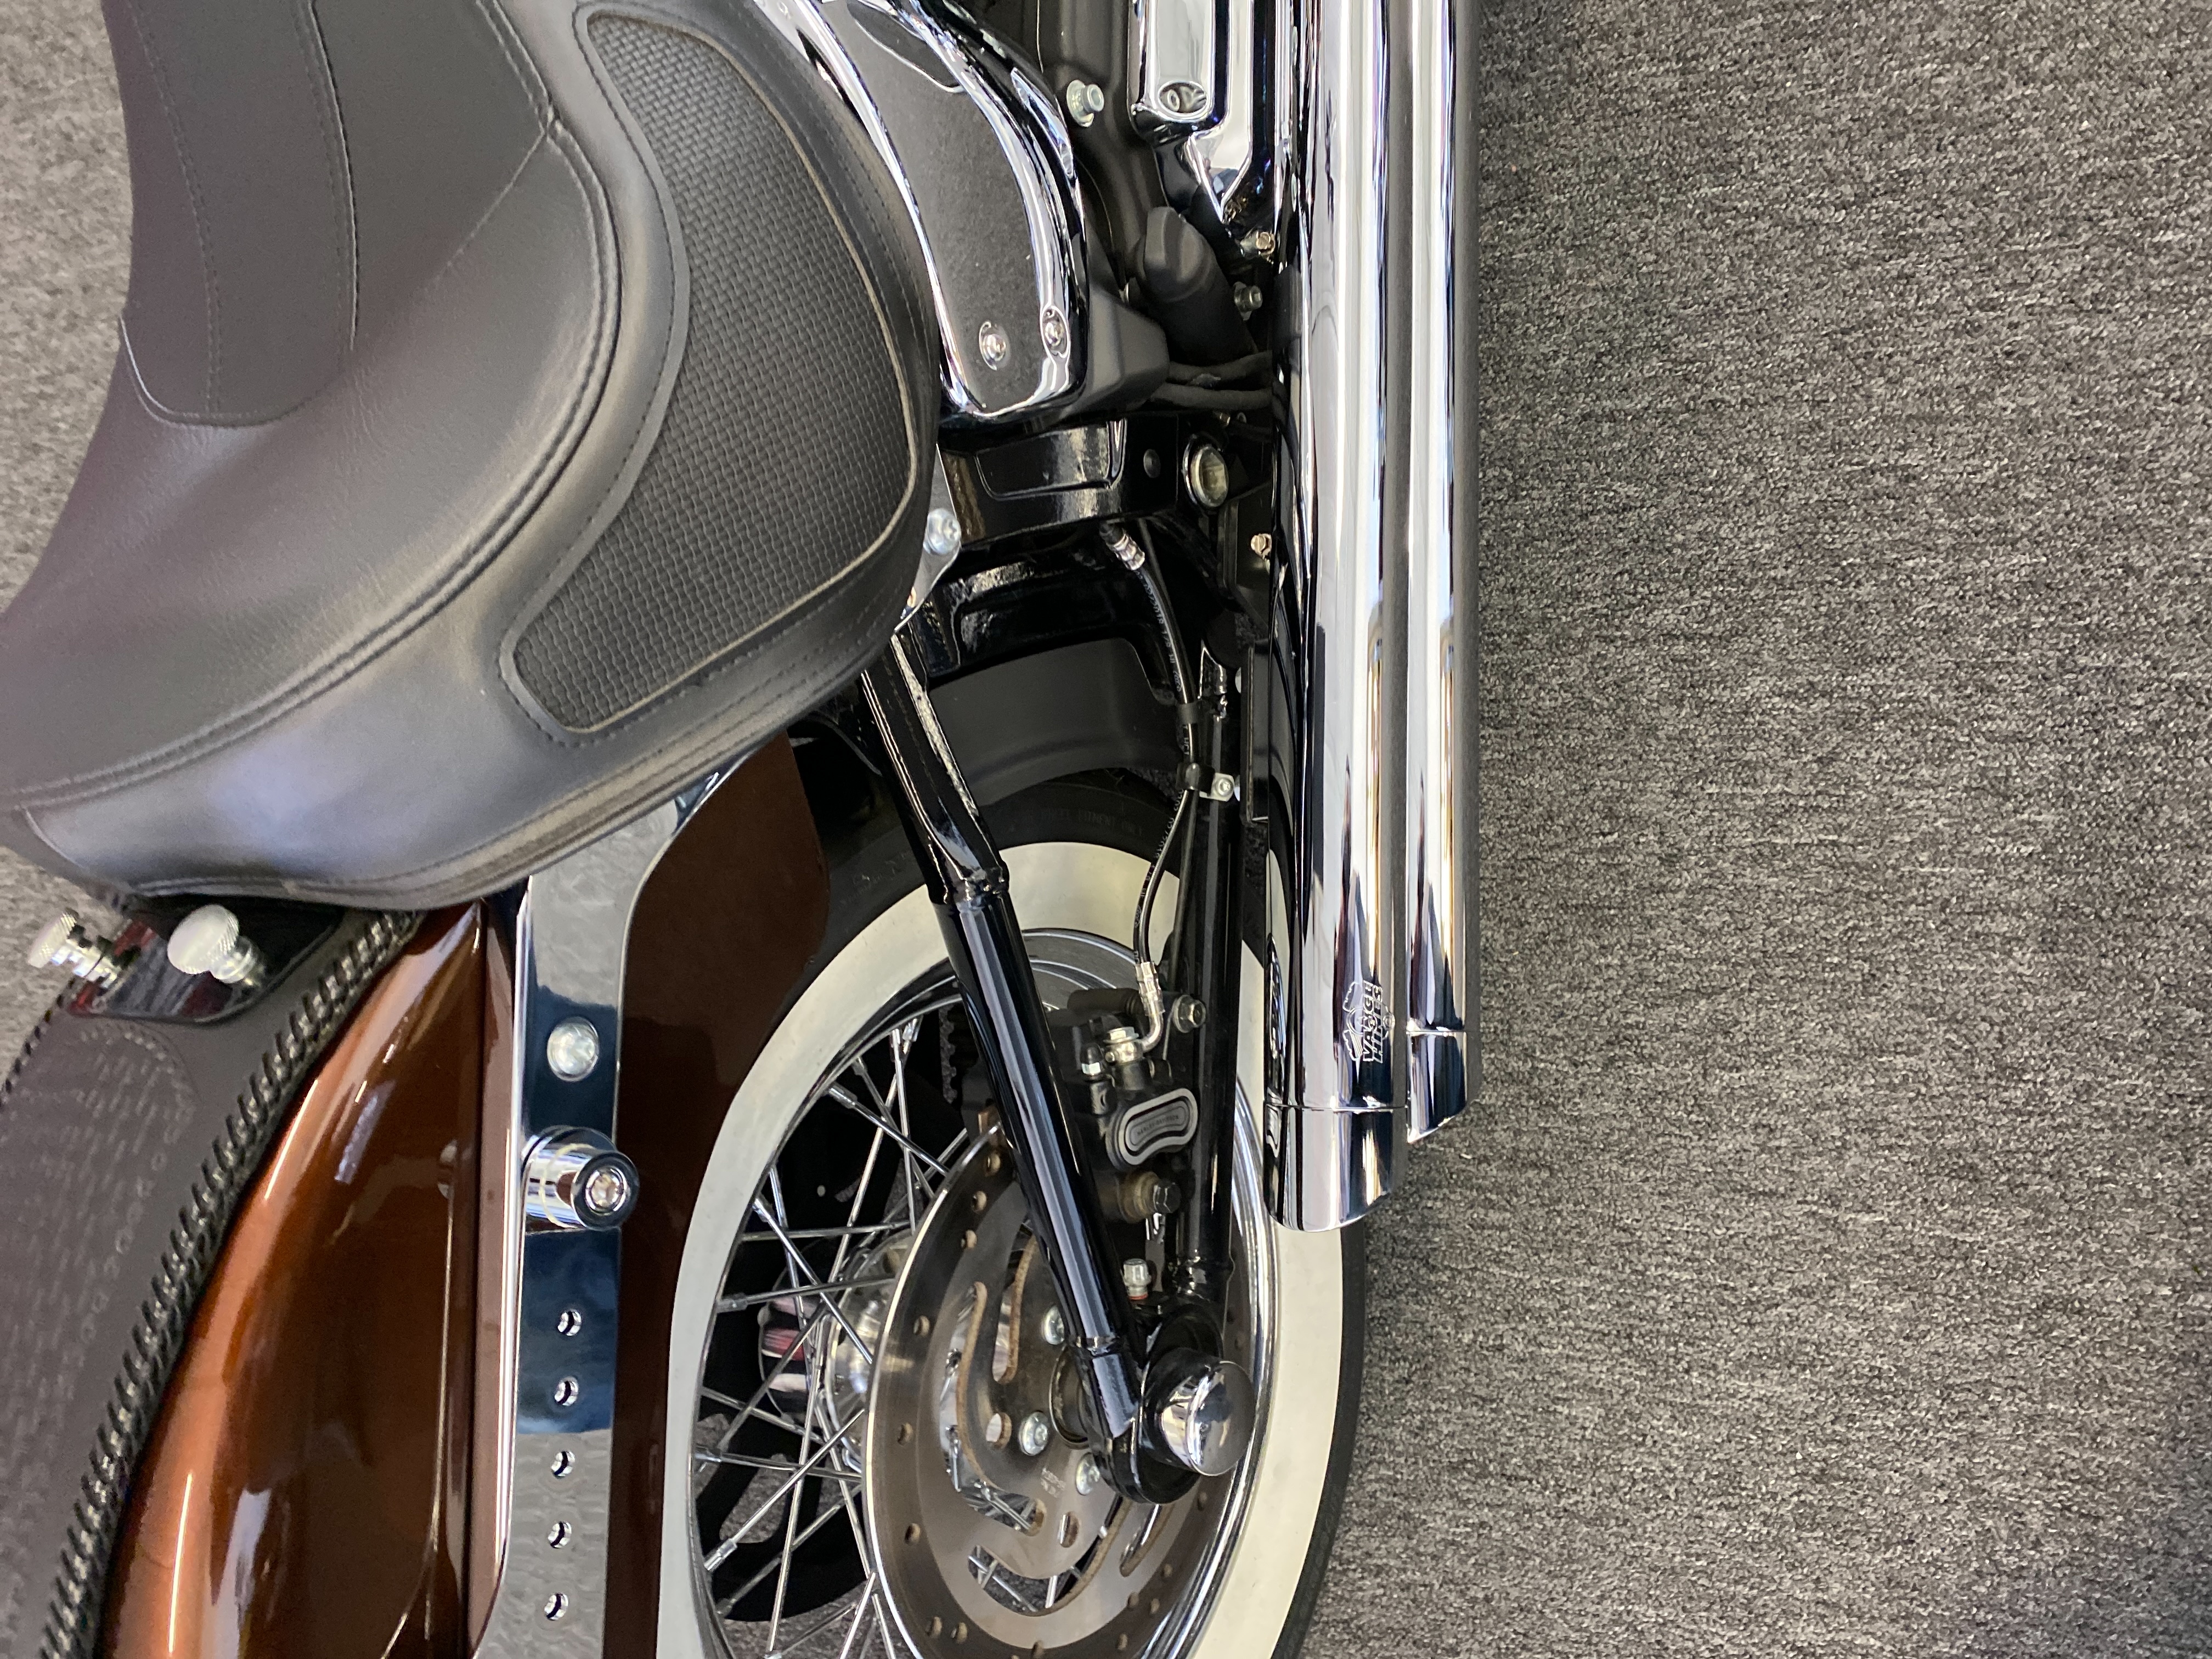 2019 Harley-Davidson Softail Deluxe at Outpost Harley-Davidson